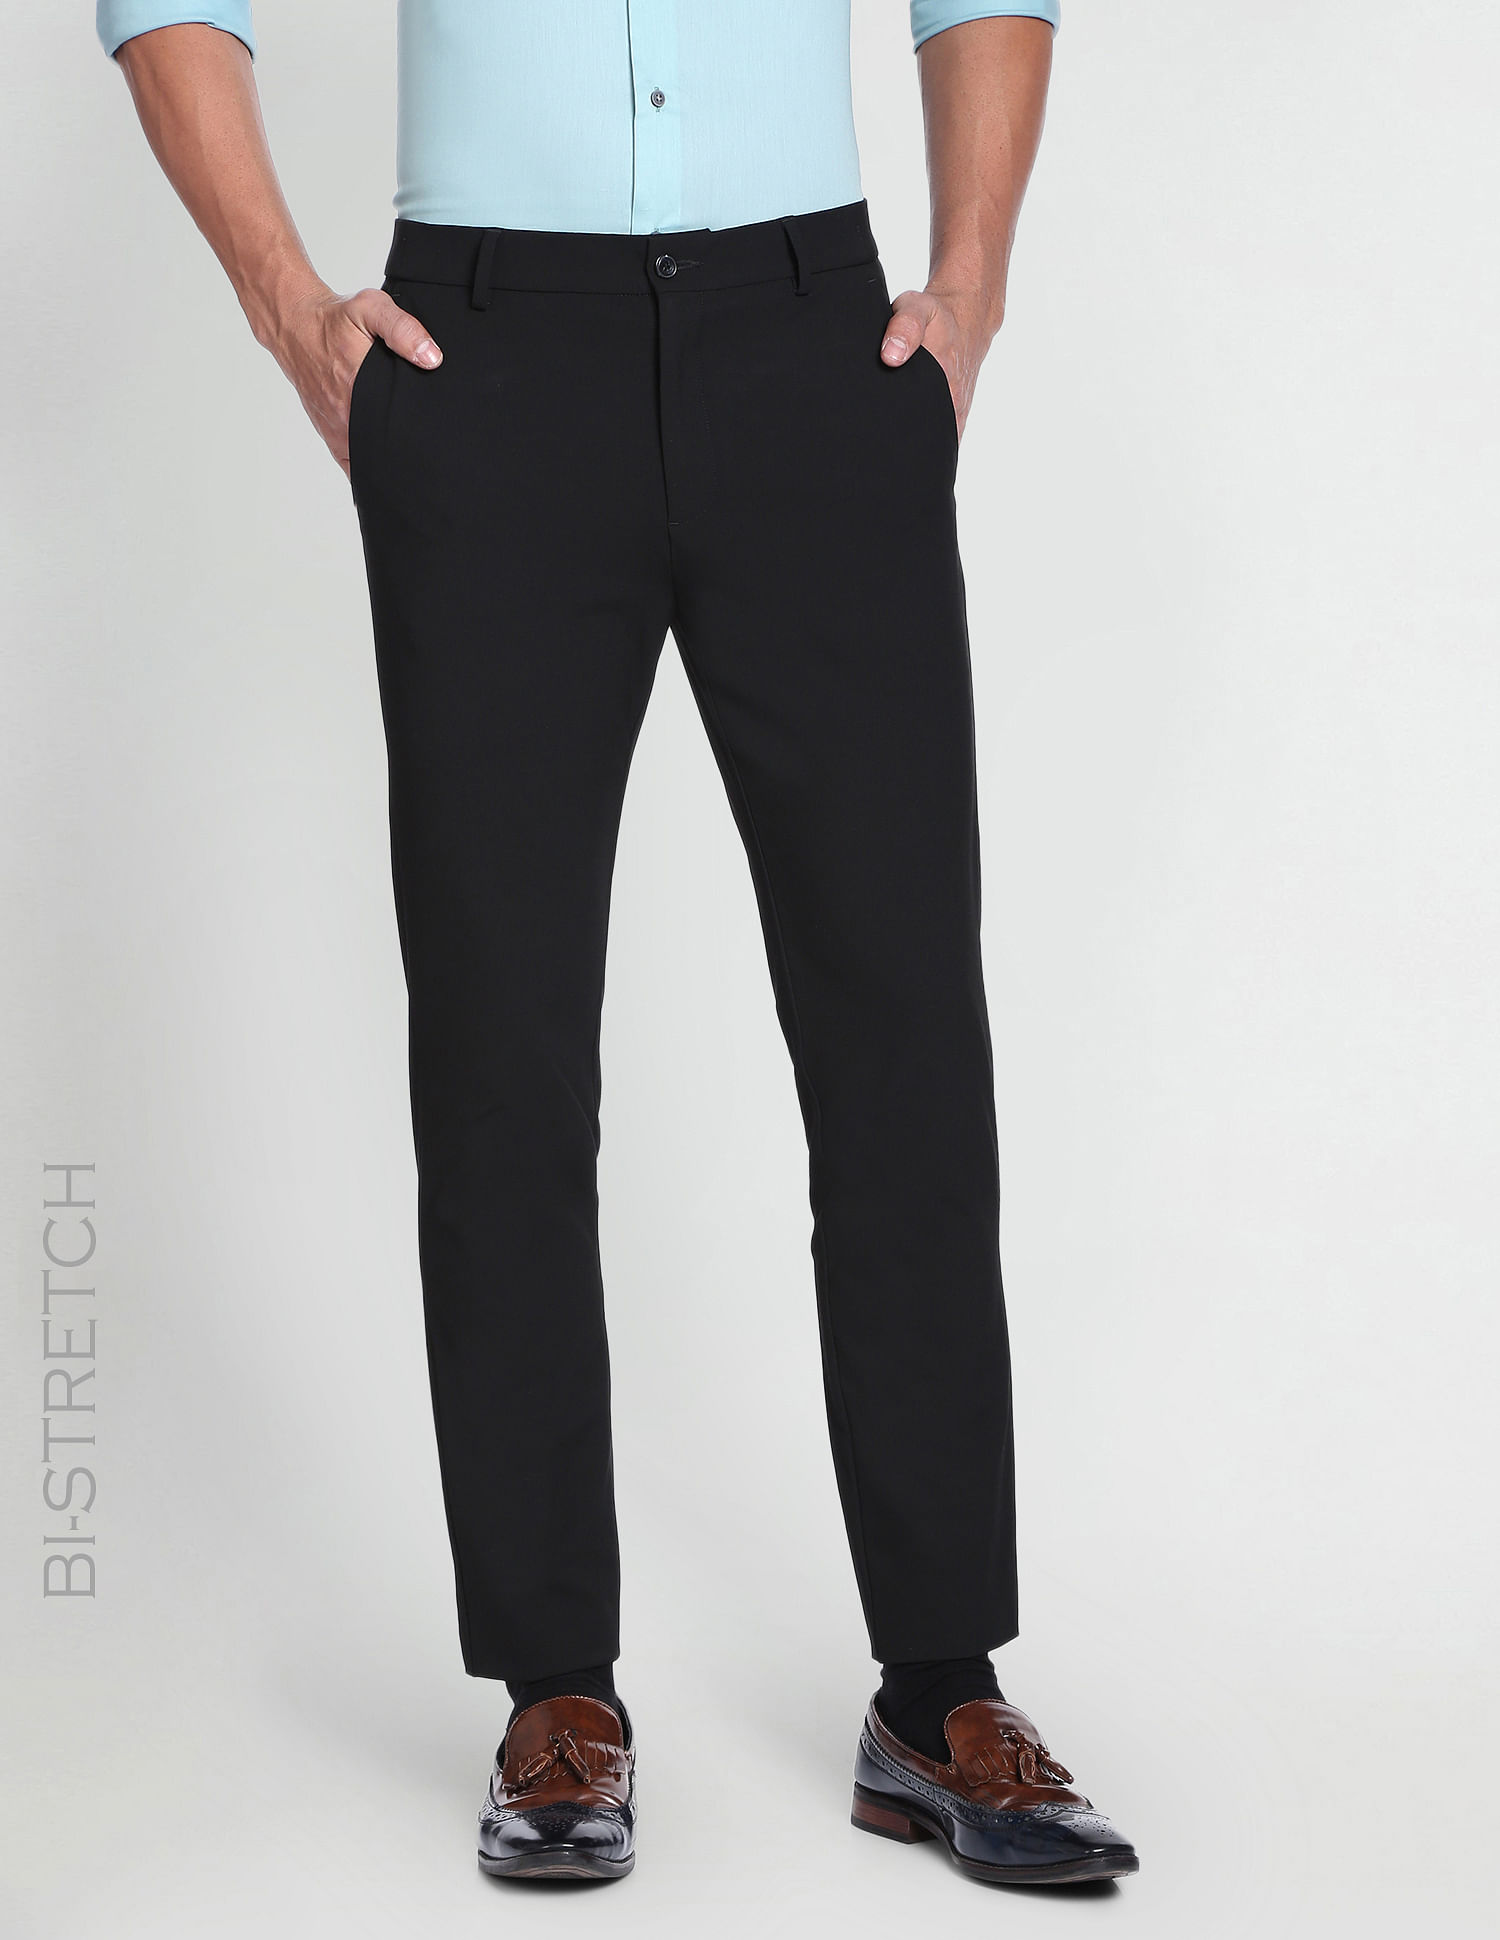 Buy U.S. POLO ASSN. Men Khaki Mid Rise Solid Formal Trousers online